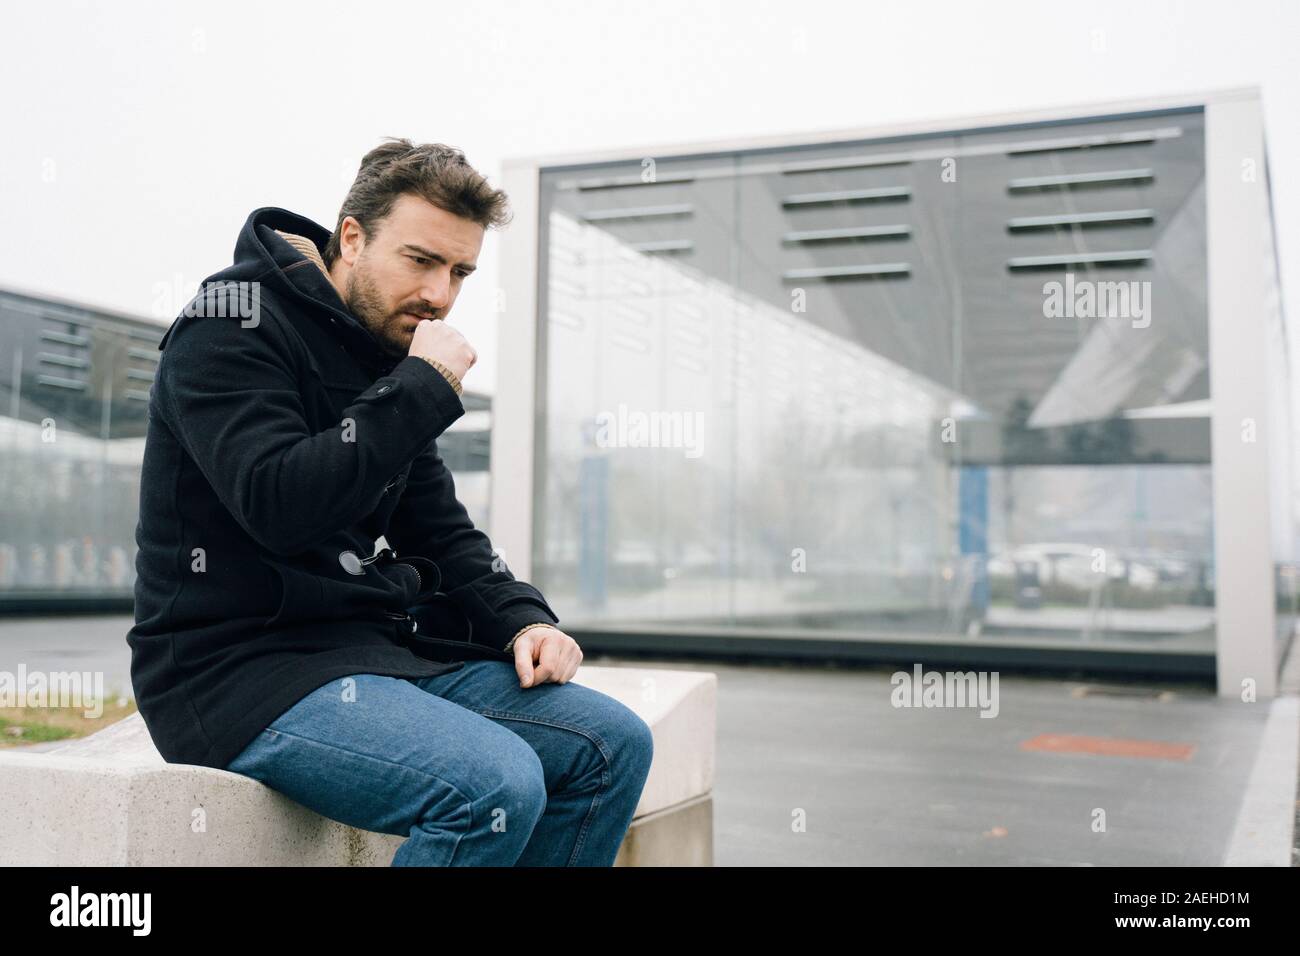 Man coughing and suffering in cold weather Stock Photo